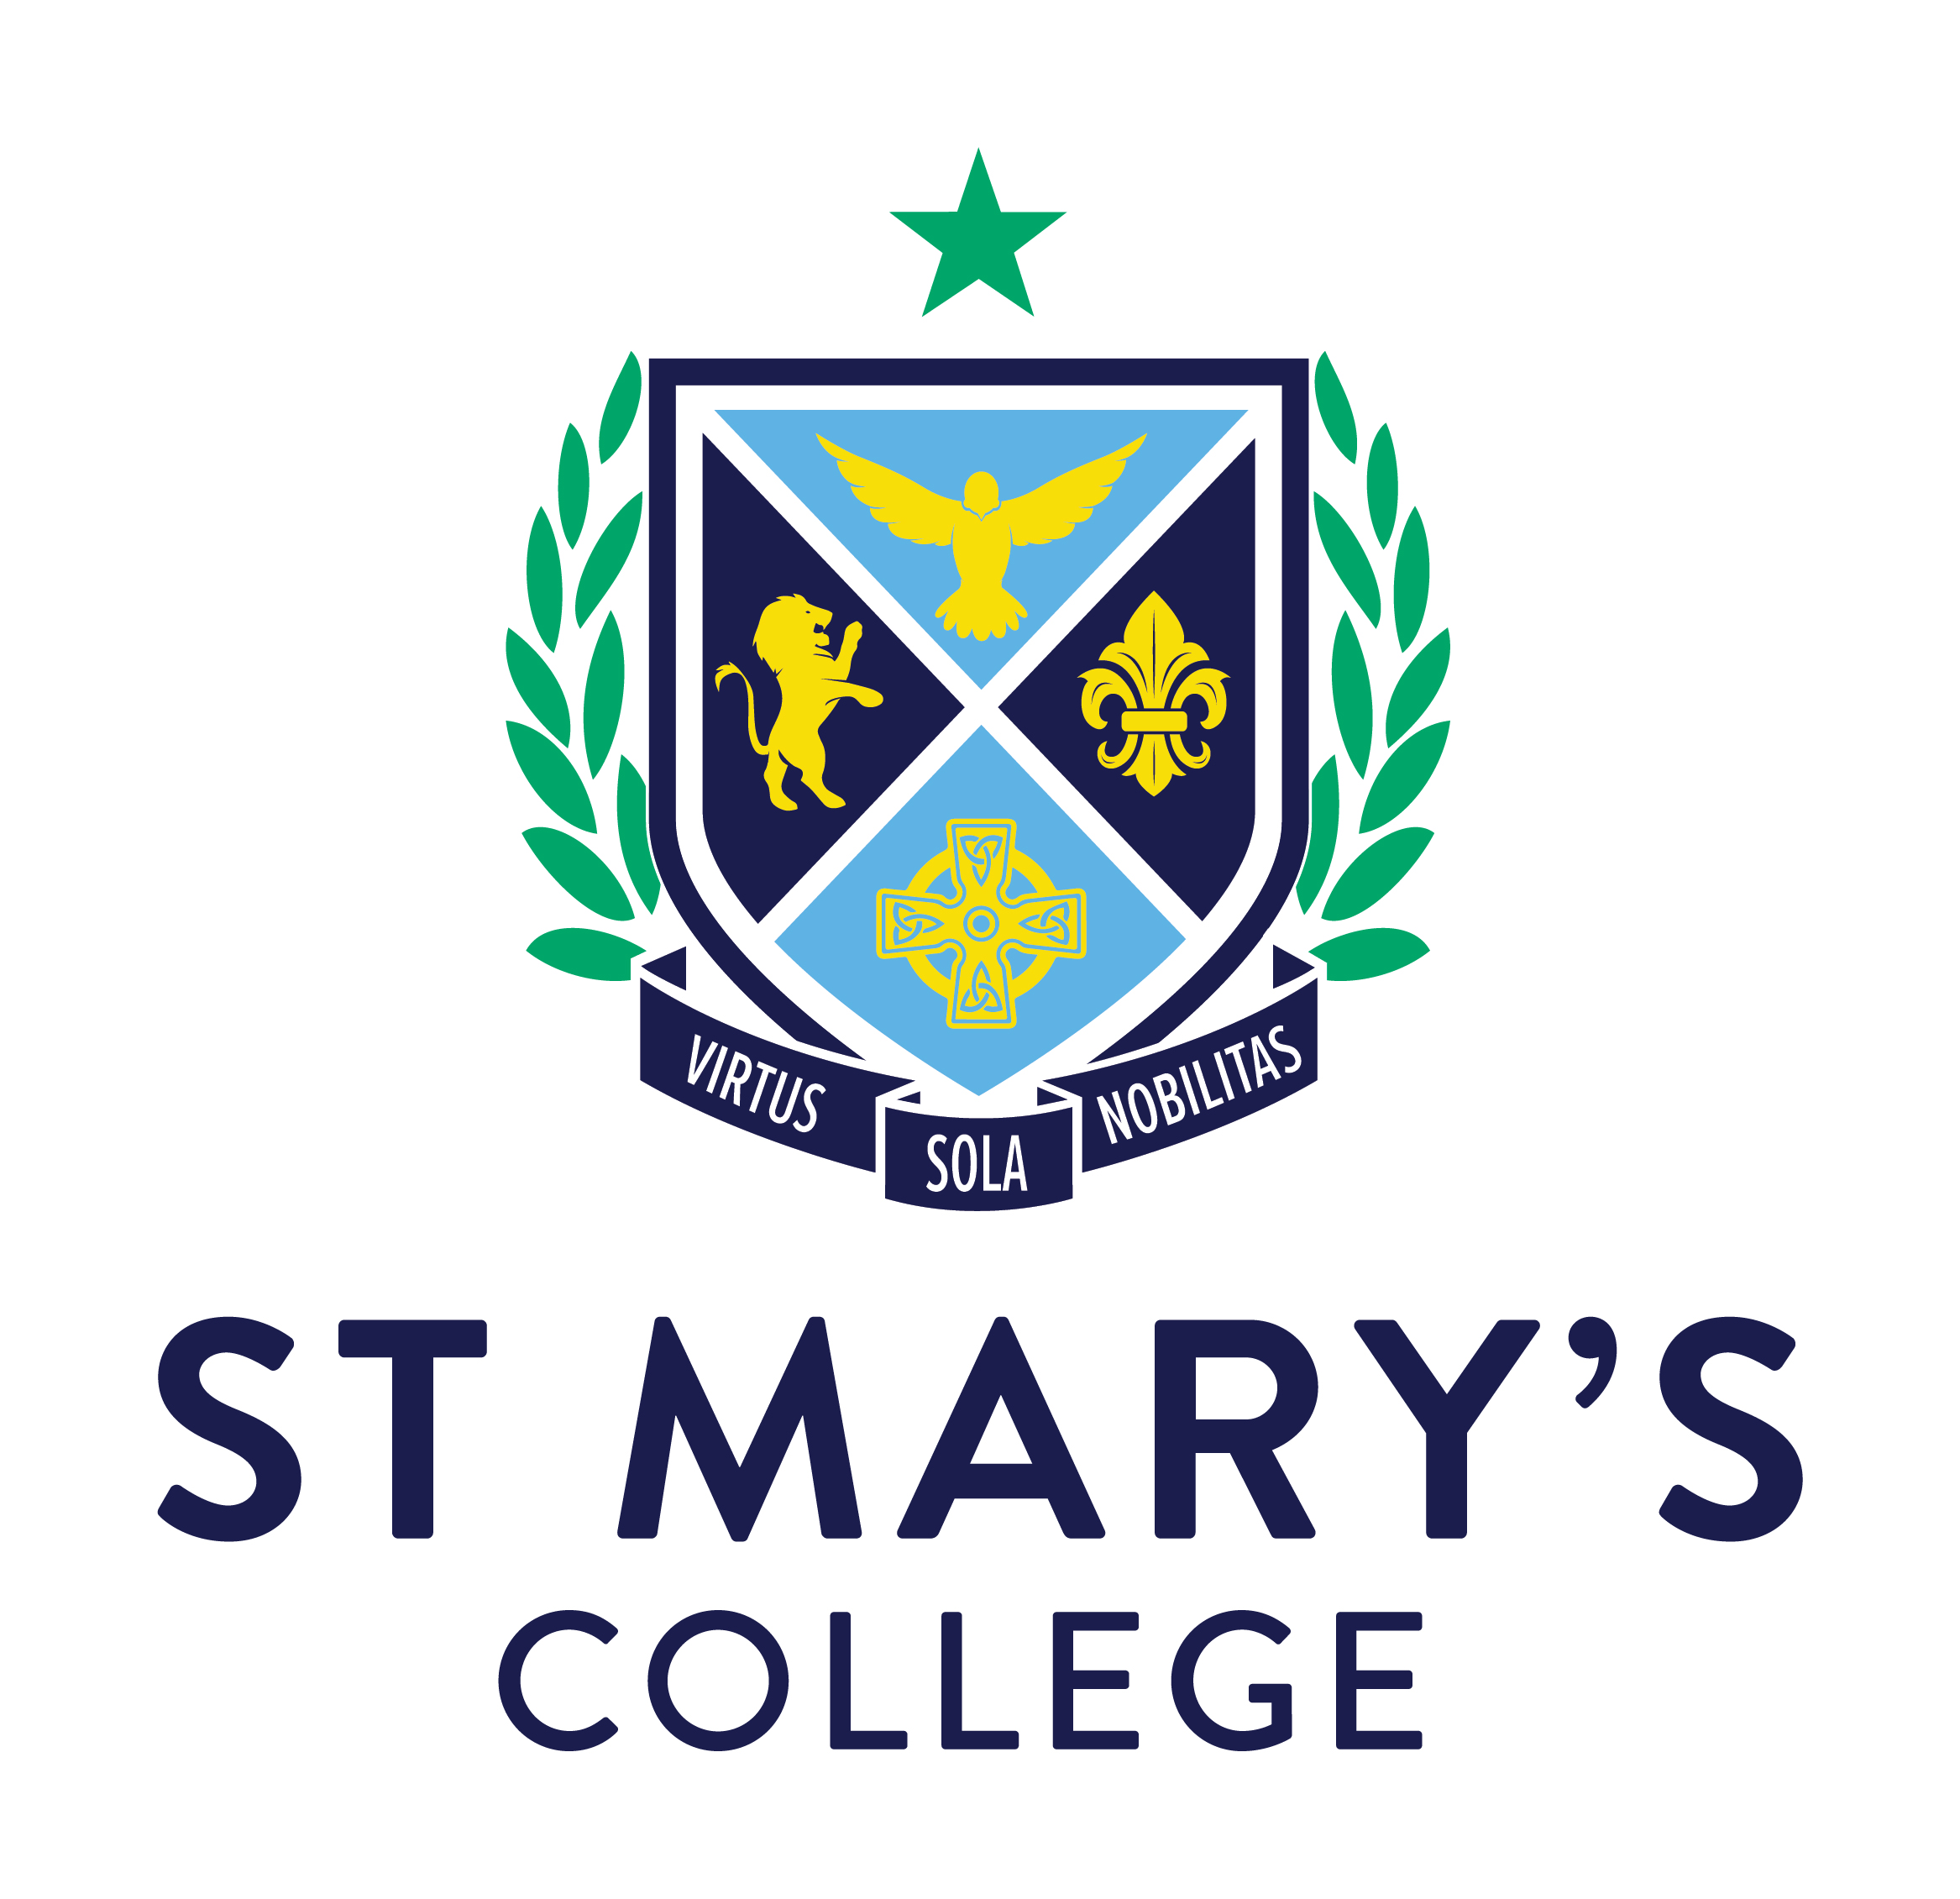 St Mary's College Portal